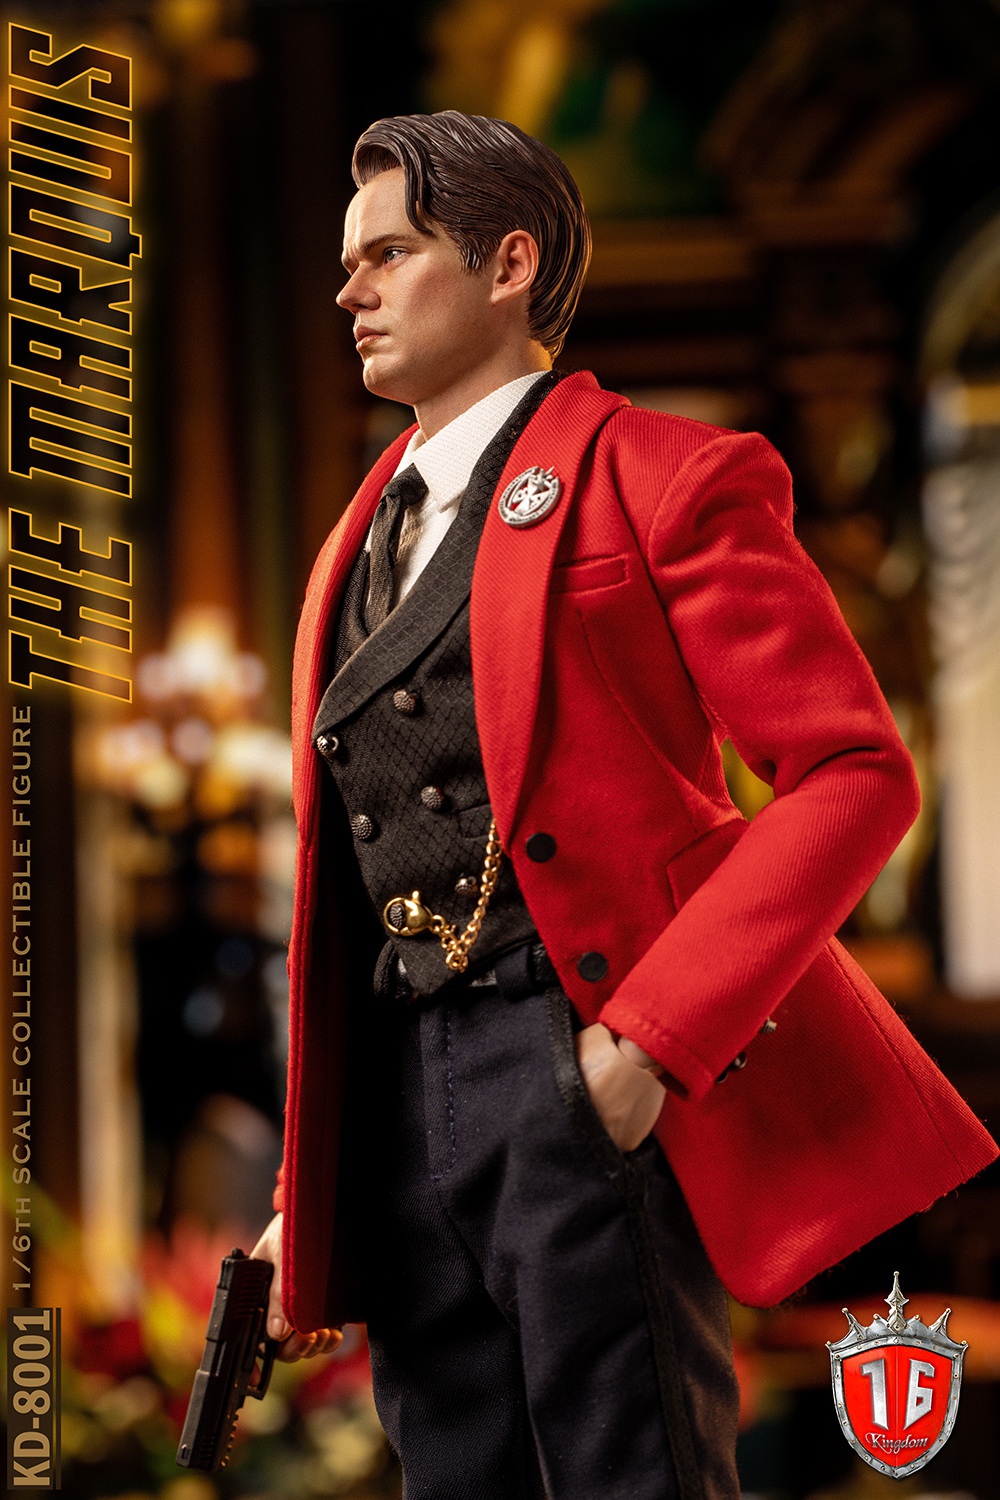 newproduct - NEW PRODUCT: Kingdom: 1/6 The Marquis Action Figure KD-8001 11405910